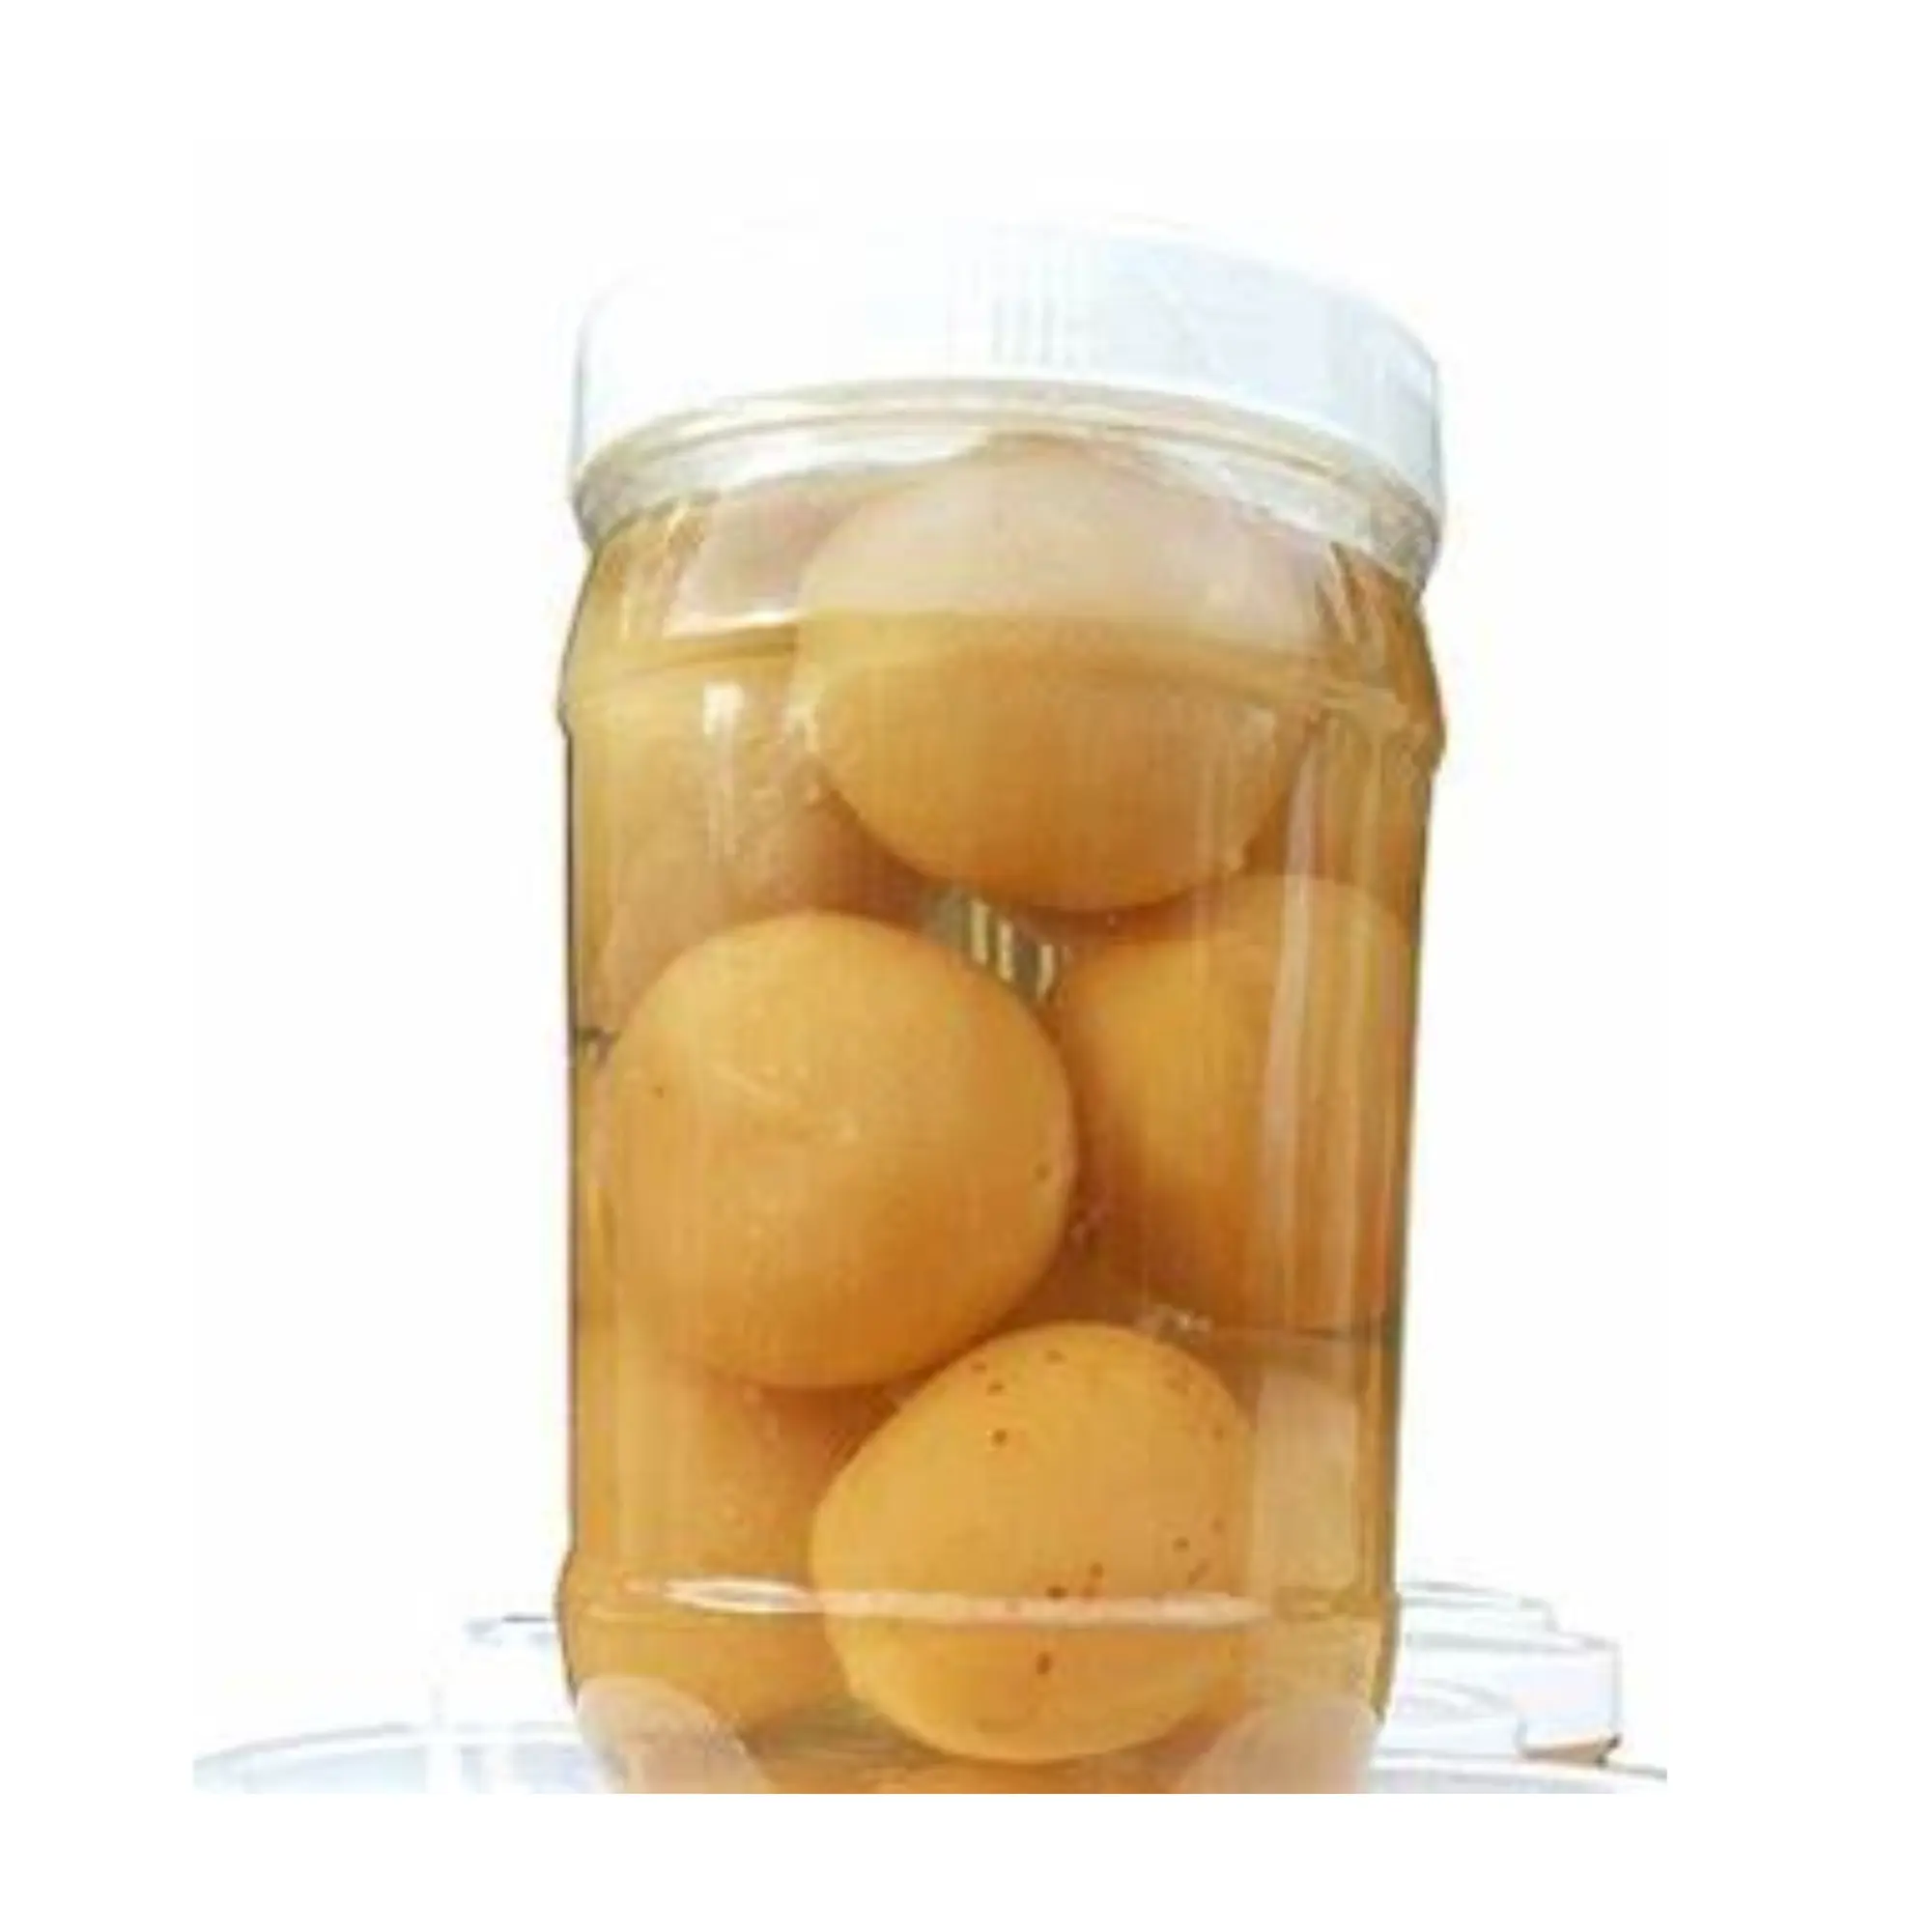 Exported Vietnamese salted and pickled limes or preserved lemons / Pickling lime in plastic or mason jars